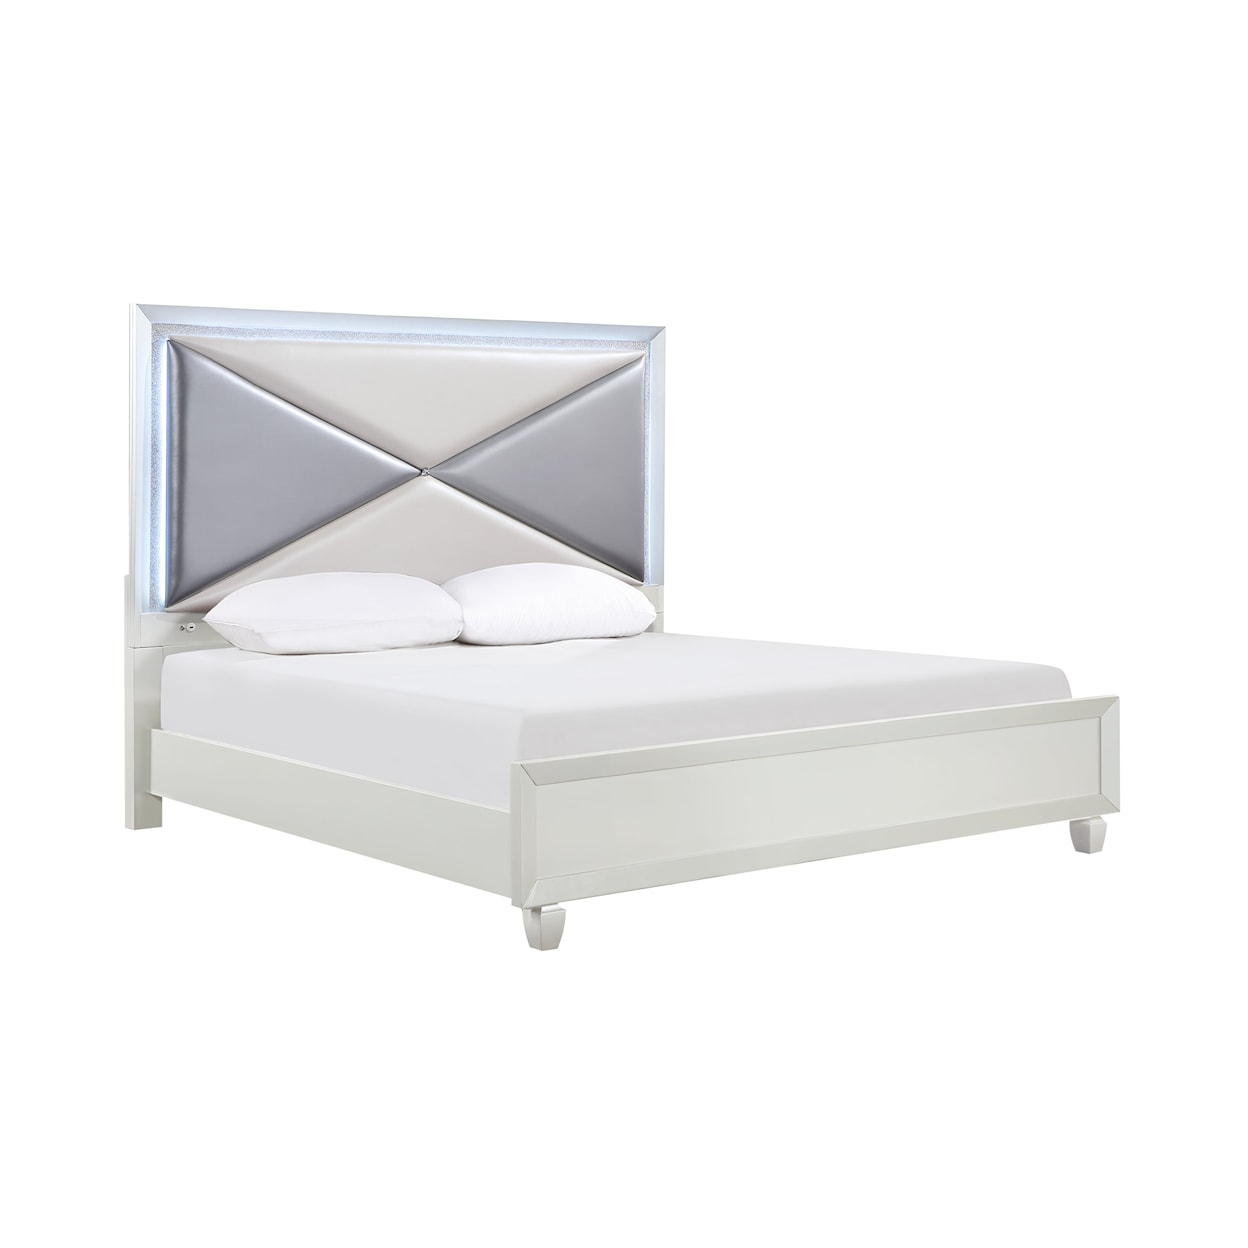 New Classic Furniture Harlequin Queen Bed